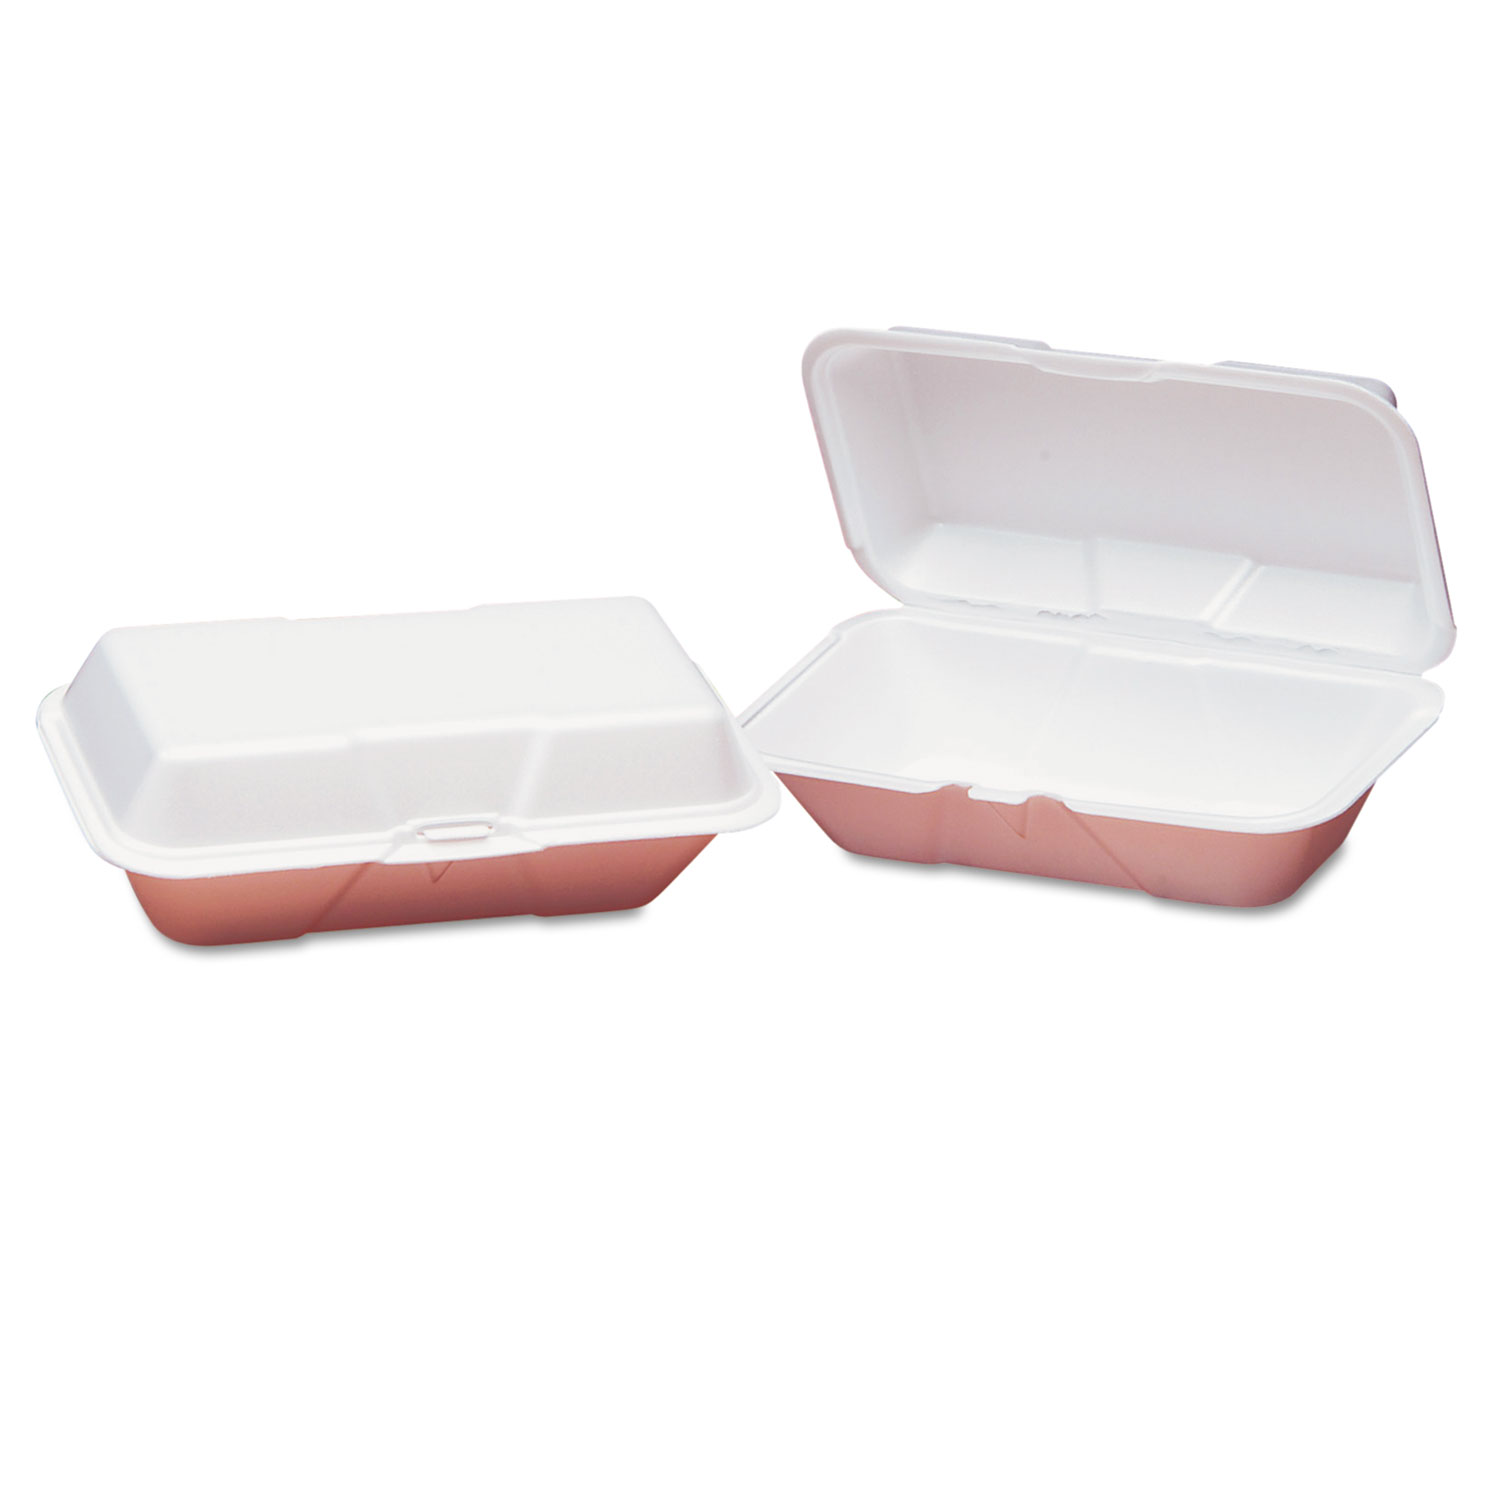  Genpak 21900--- Foam Hoagie Hinged Container, Large, White, 9-1/2x5-1/4x3-1/2, 100/Bag (GNP21900) 